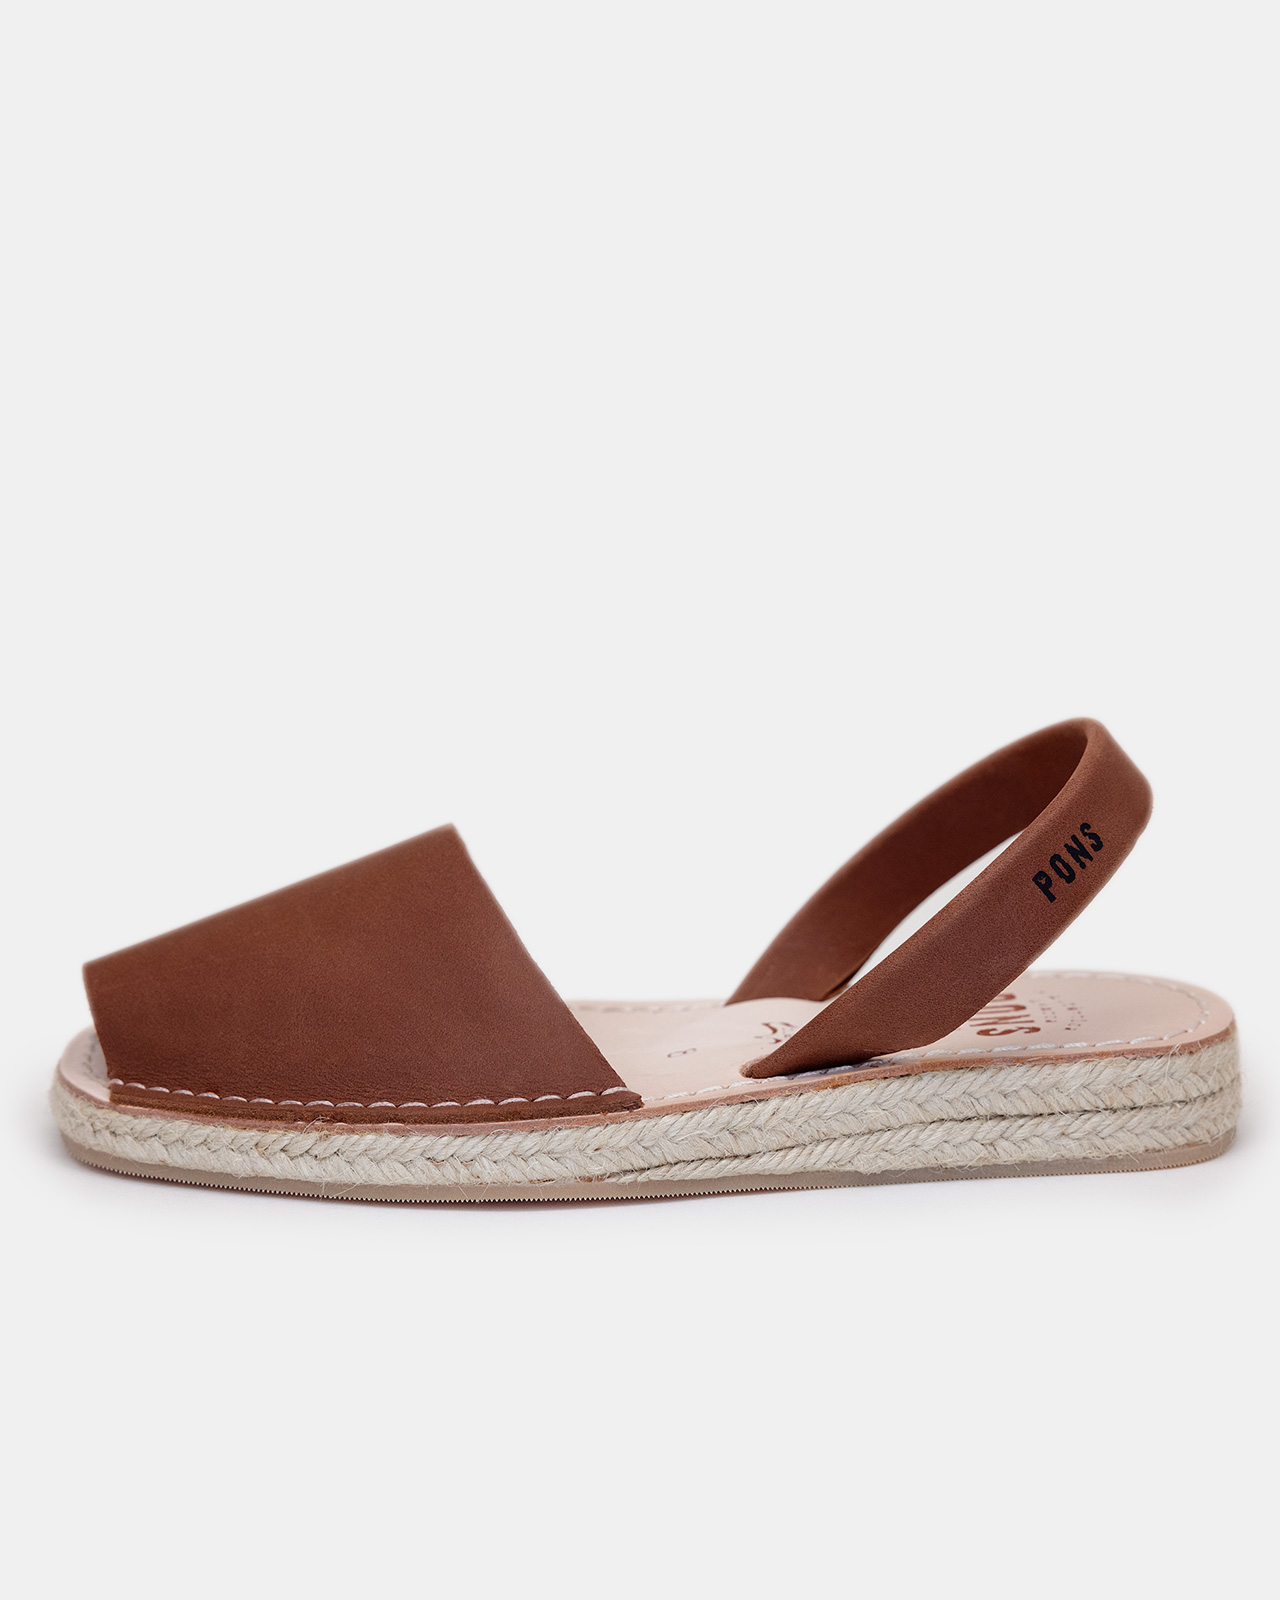 Pons Classic Brown Avarca Sandals in Natural Leather for Women | Avarcas